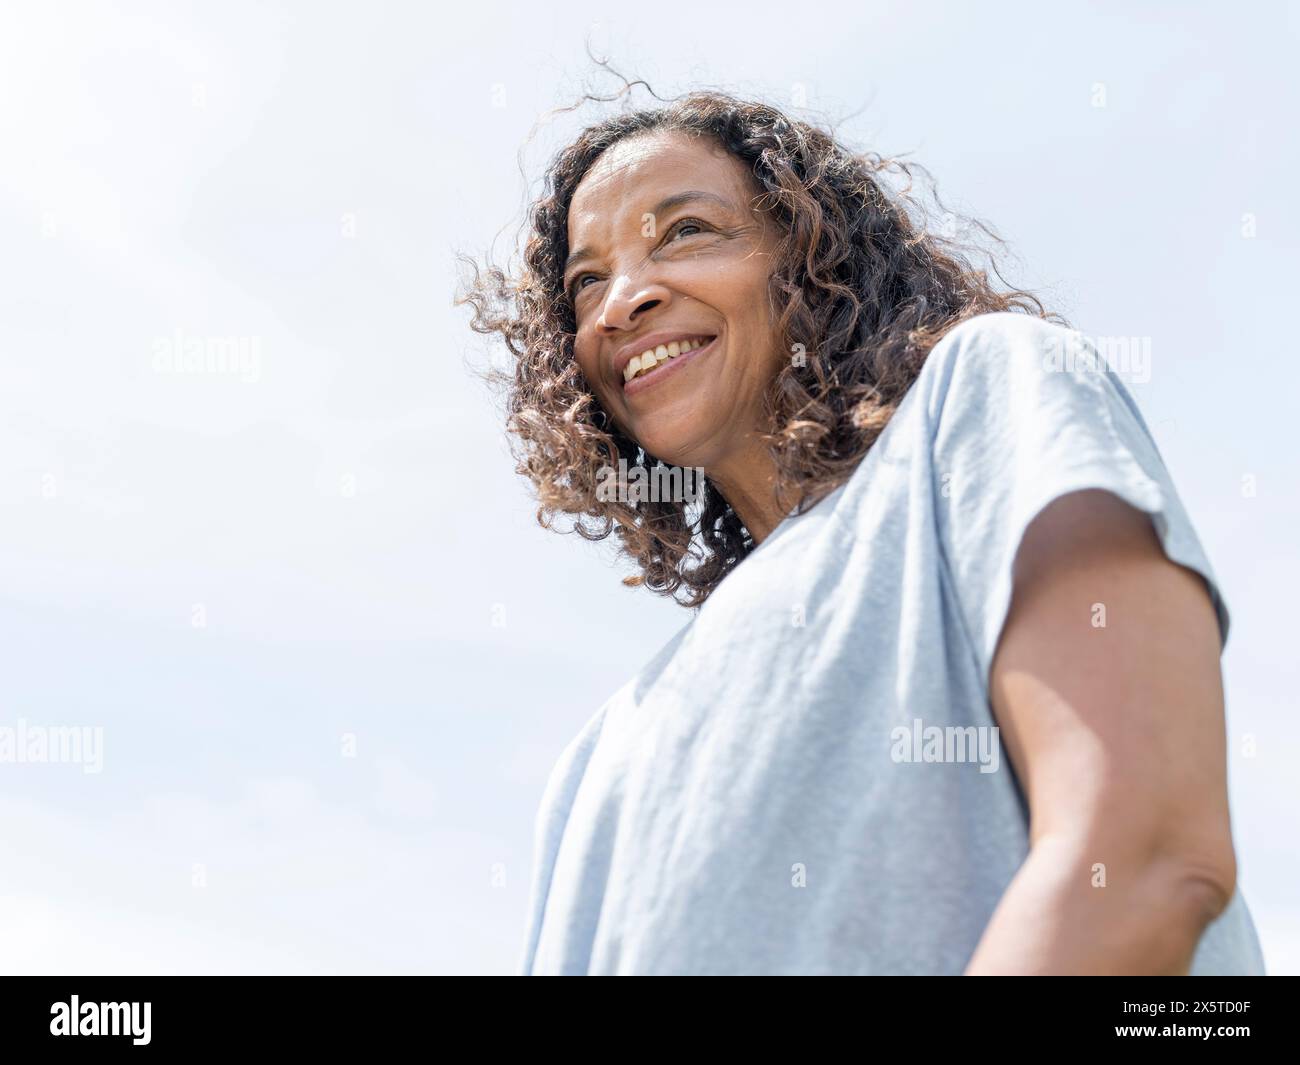 Portrait of smiling woman against sky Stock Photo